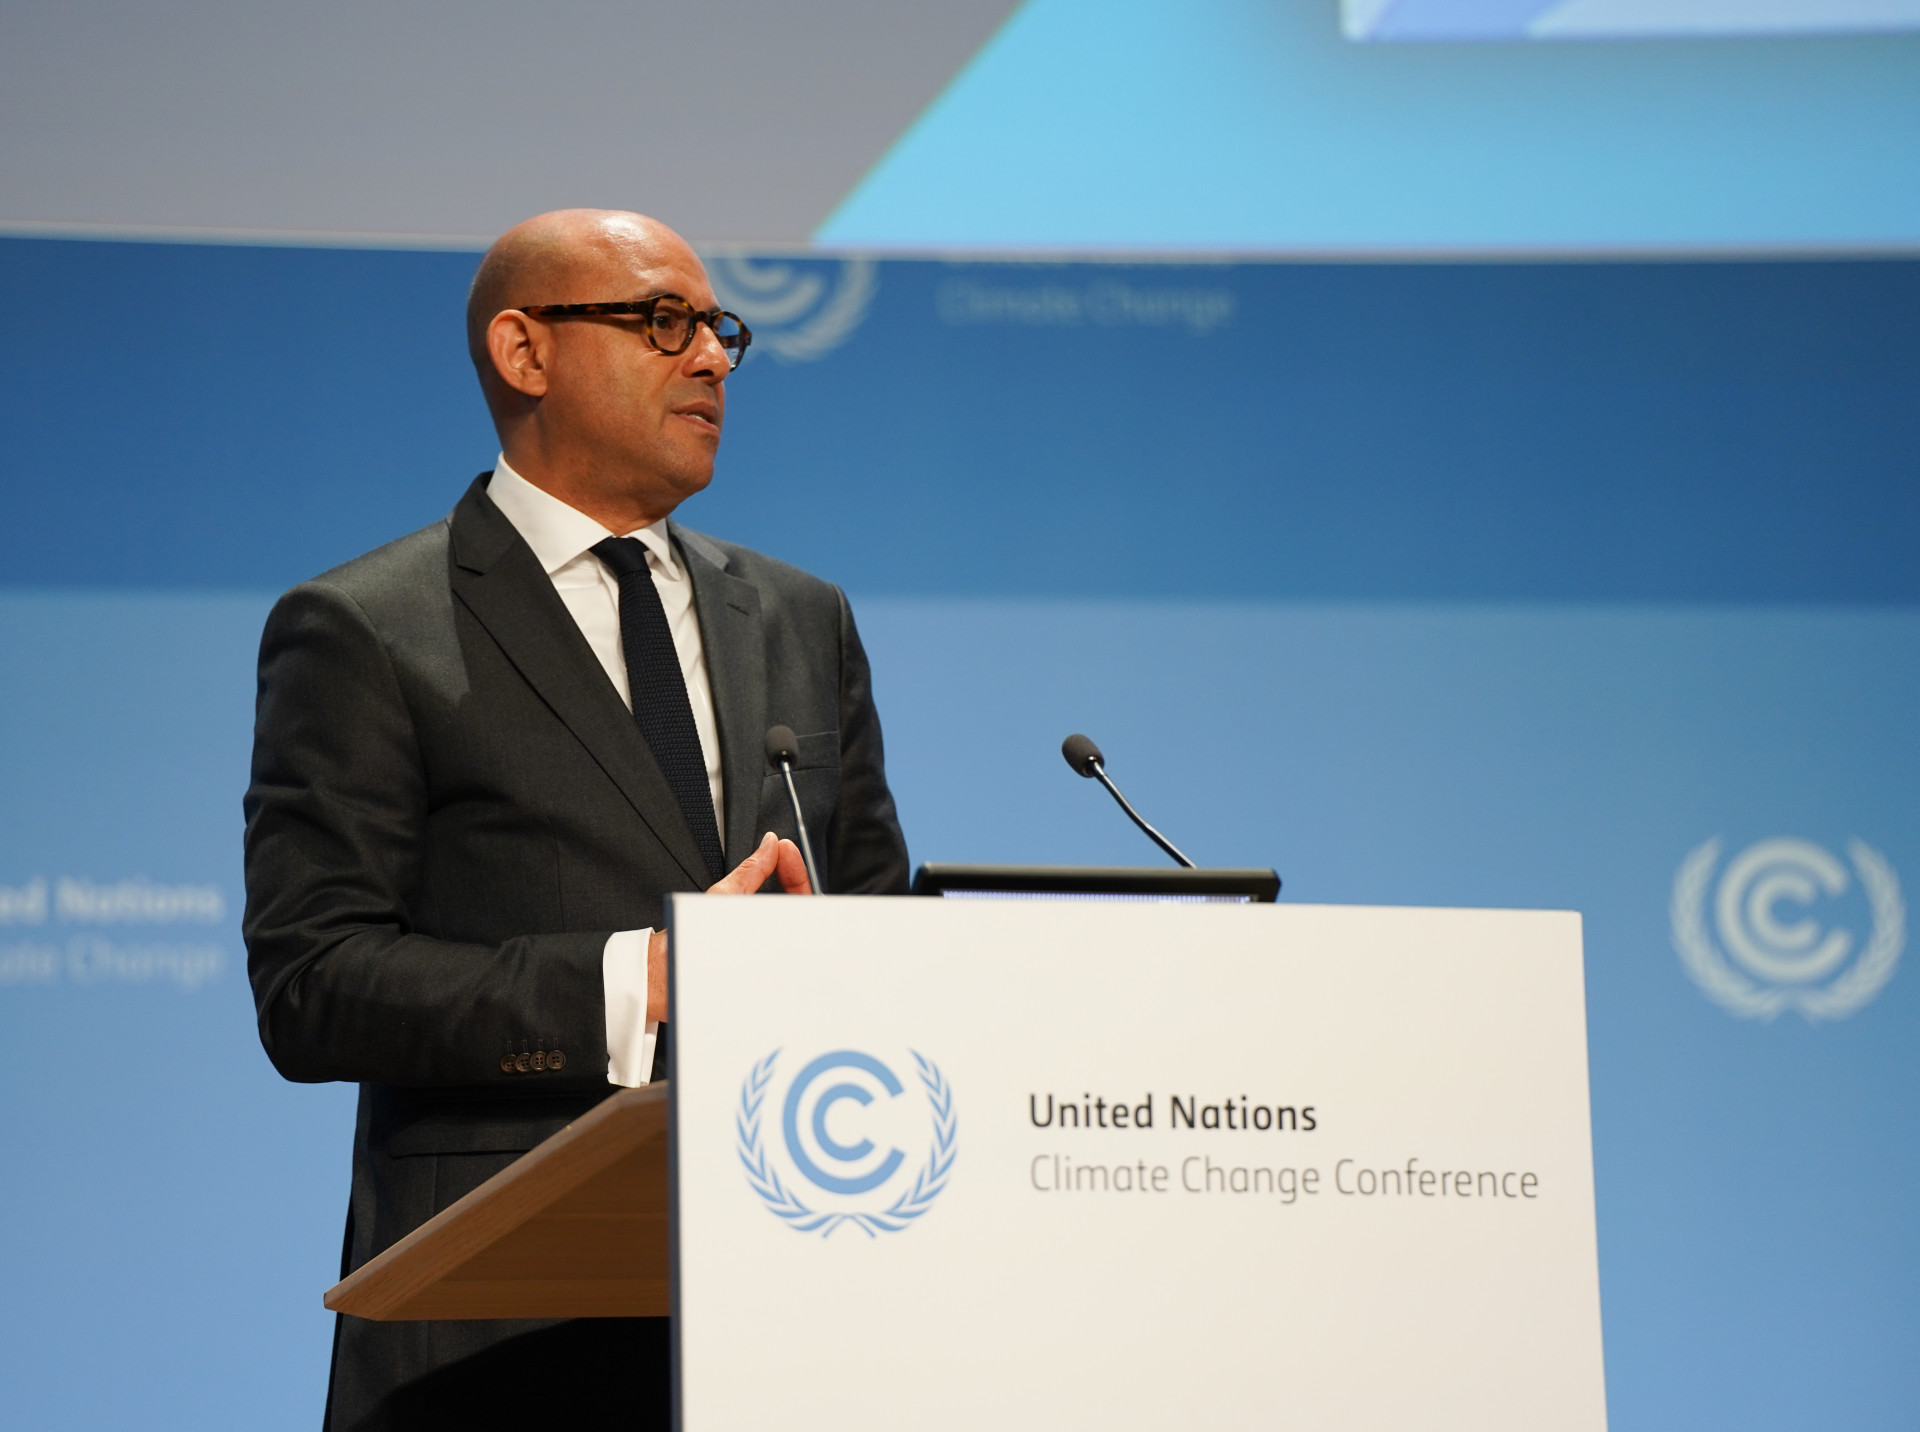 UN Climate Change Executive Secretary Simon Stiell at the closing of the June Climate Meetings (SB 60) in Bonn. 